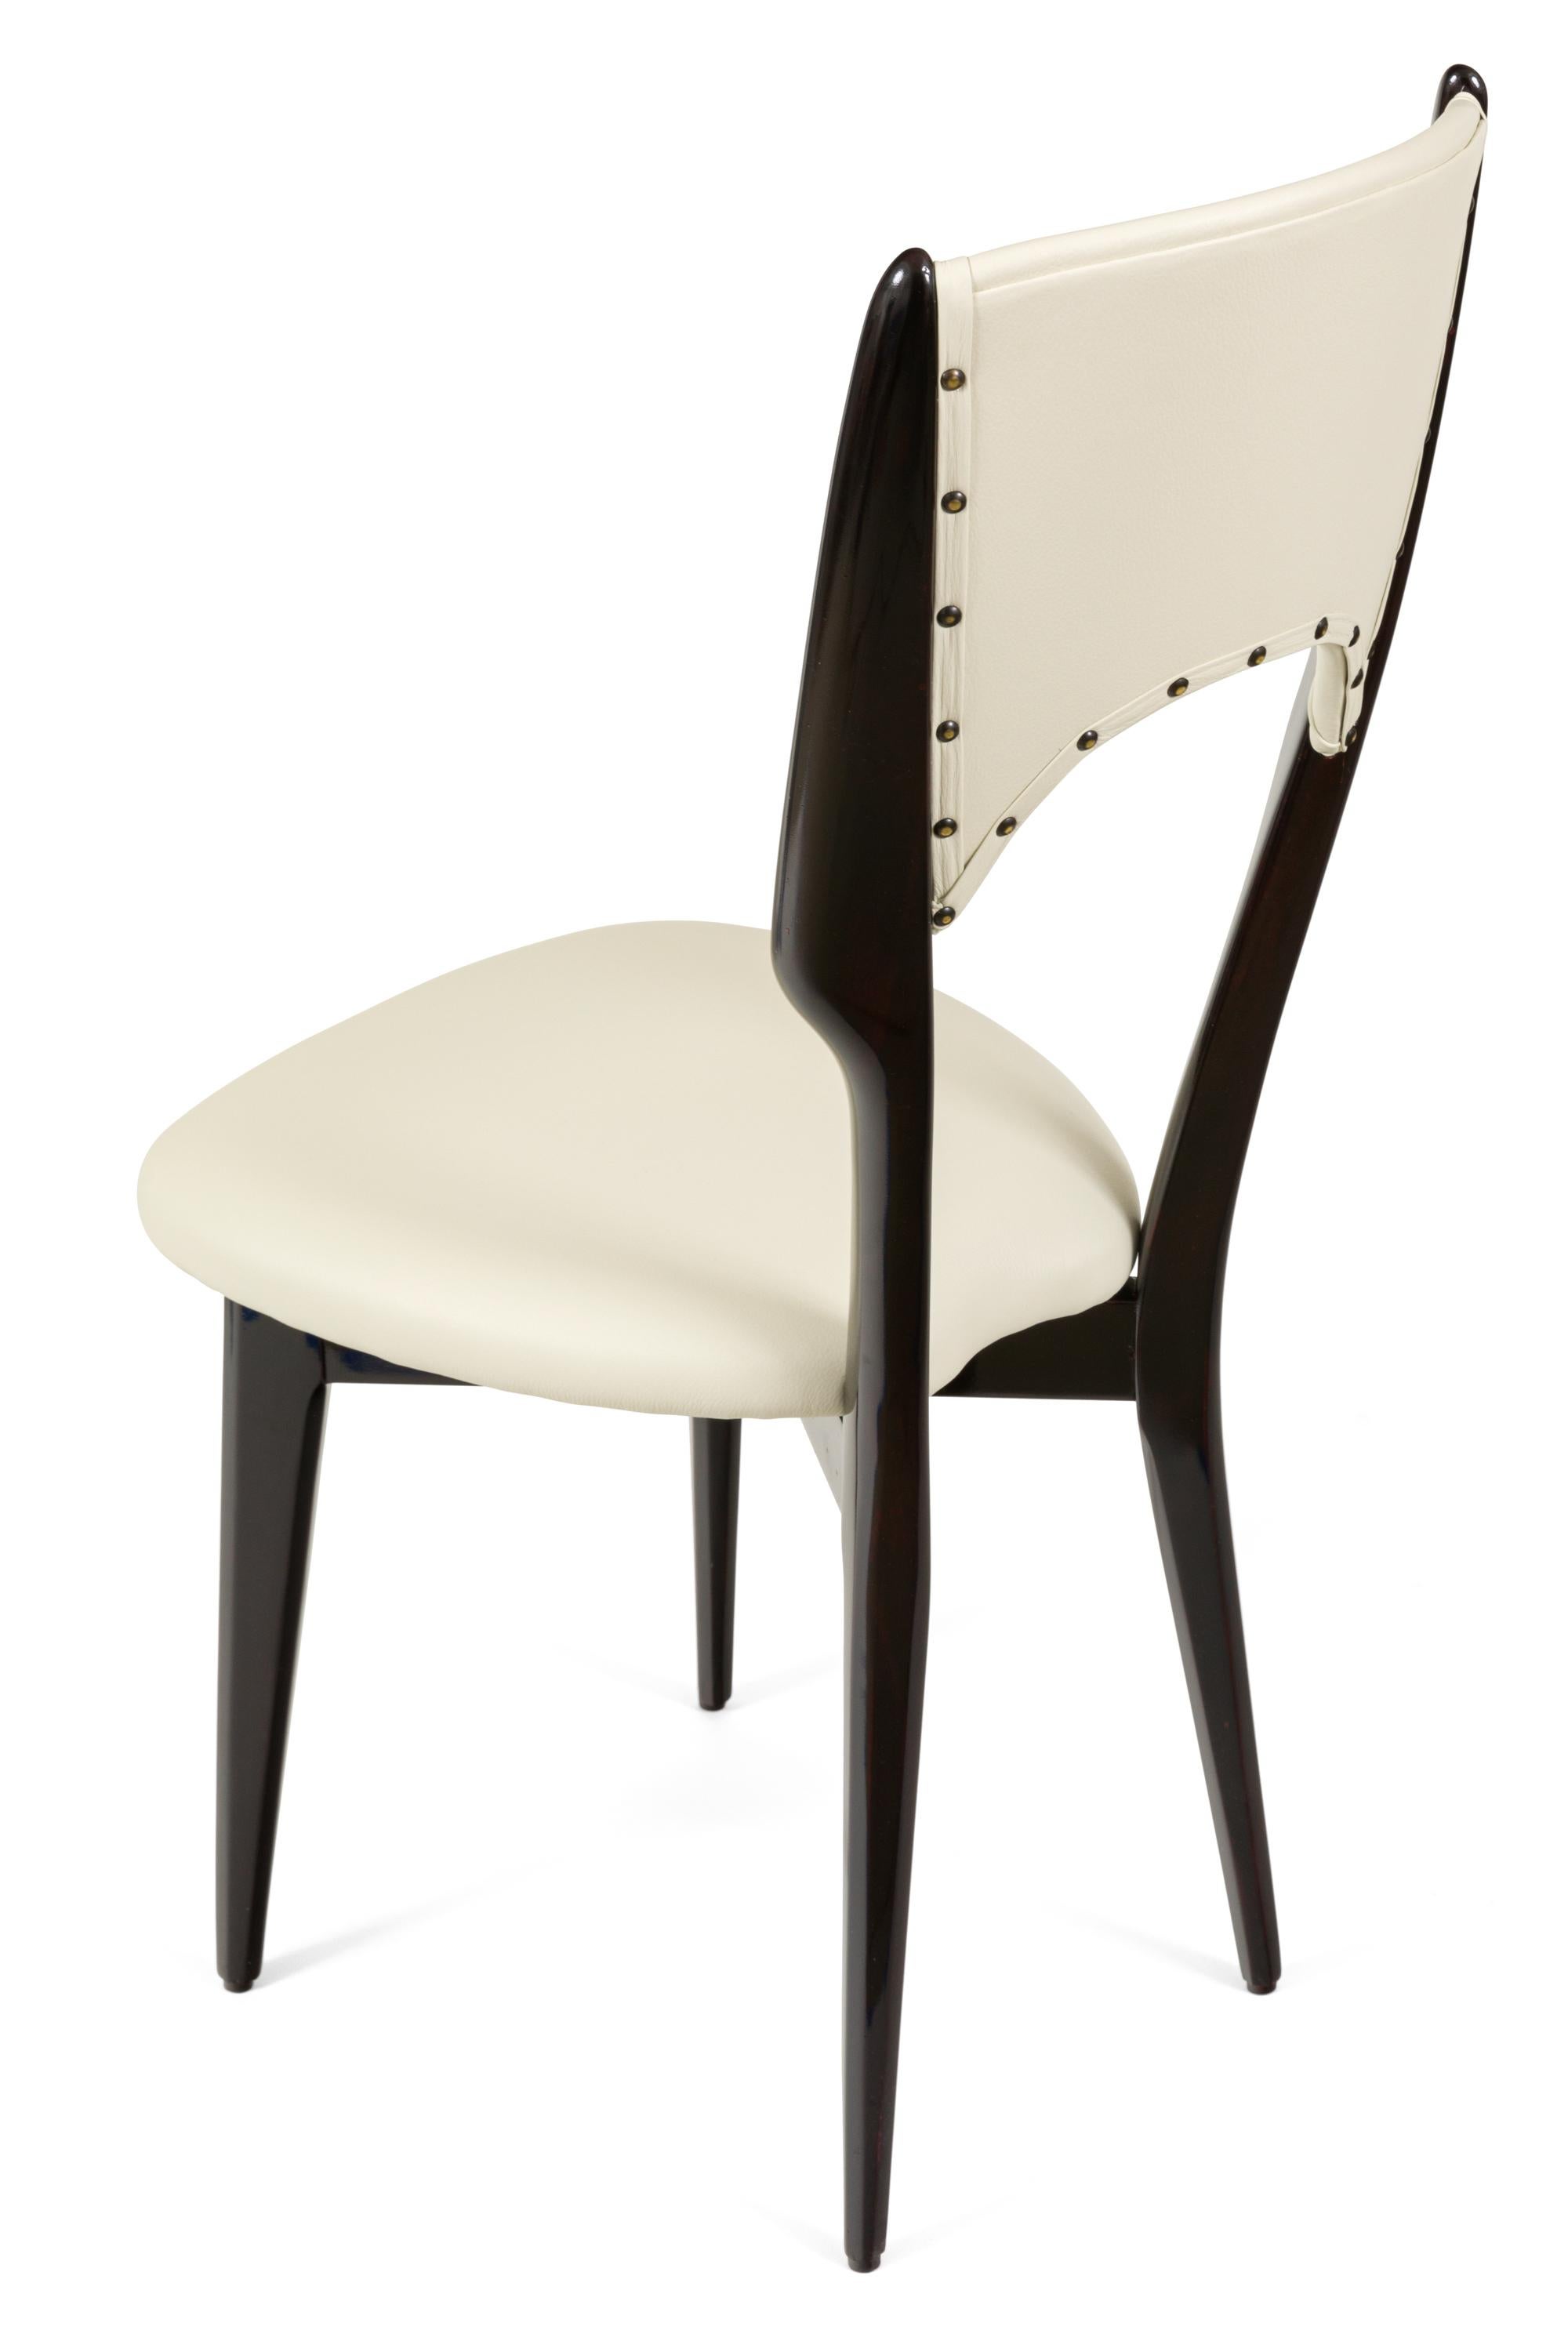 Mid-20th Century Mid-Century Black Lacquer & White Leather Dining Chairs, Italy 1950s